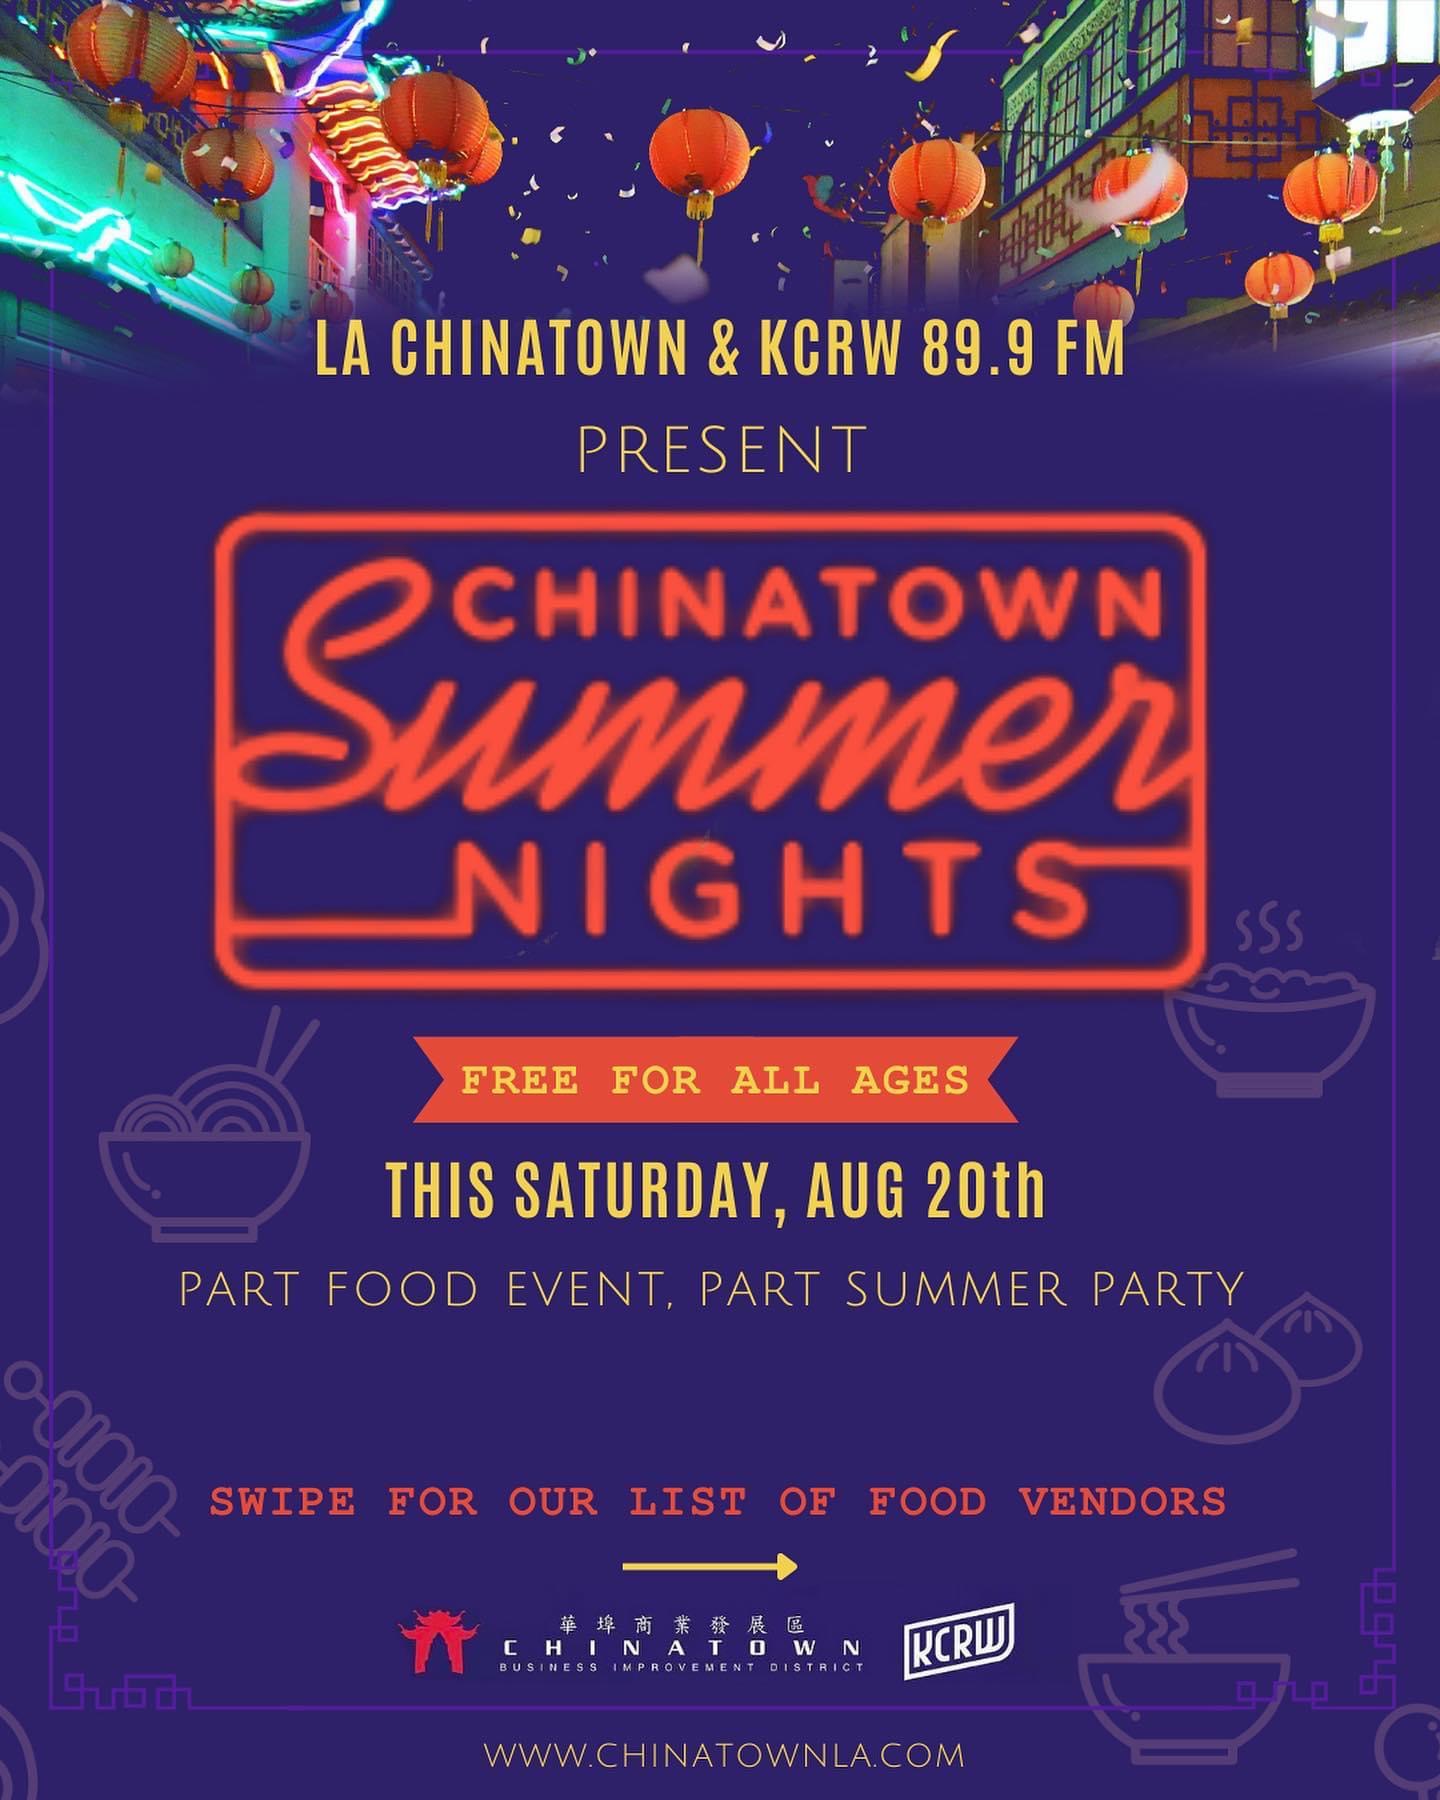 Chinatown Summer Nights at Chinatown Central Plaza on Sat, Aug 20th